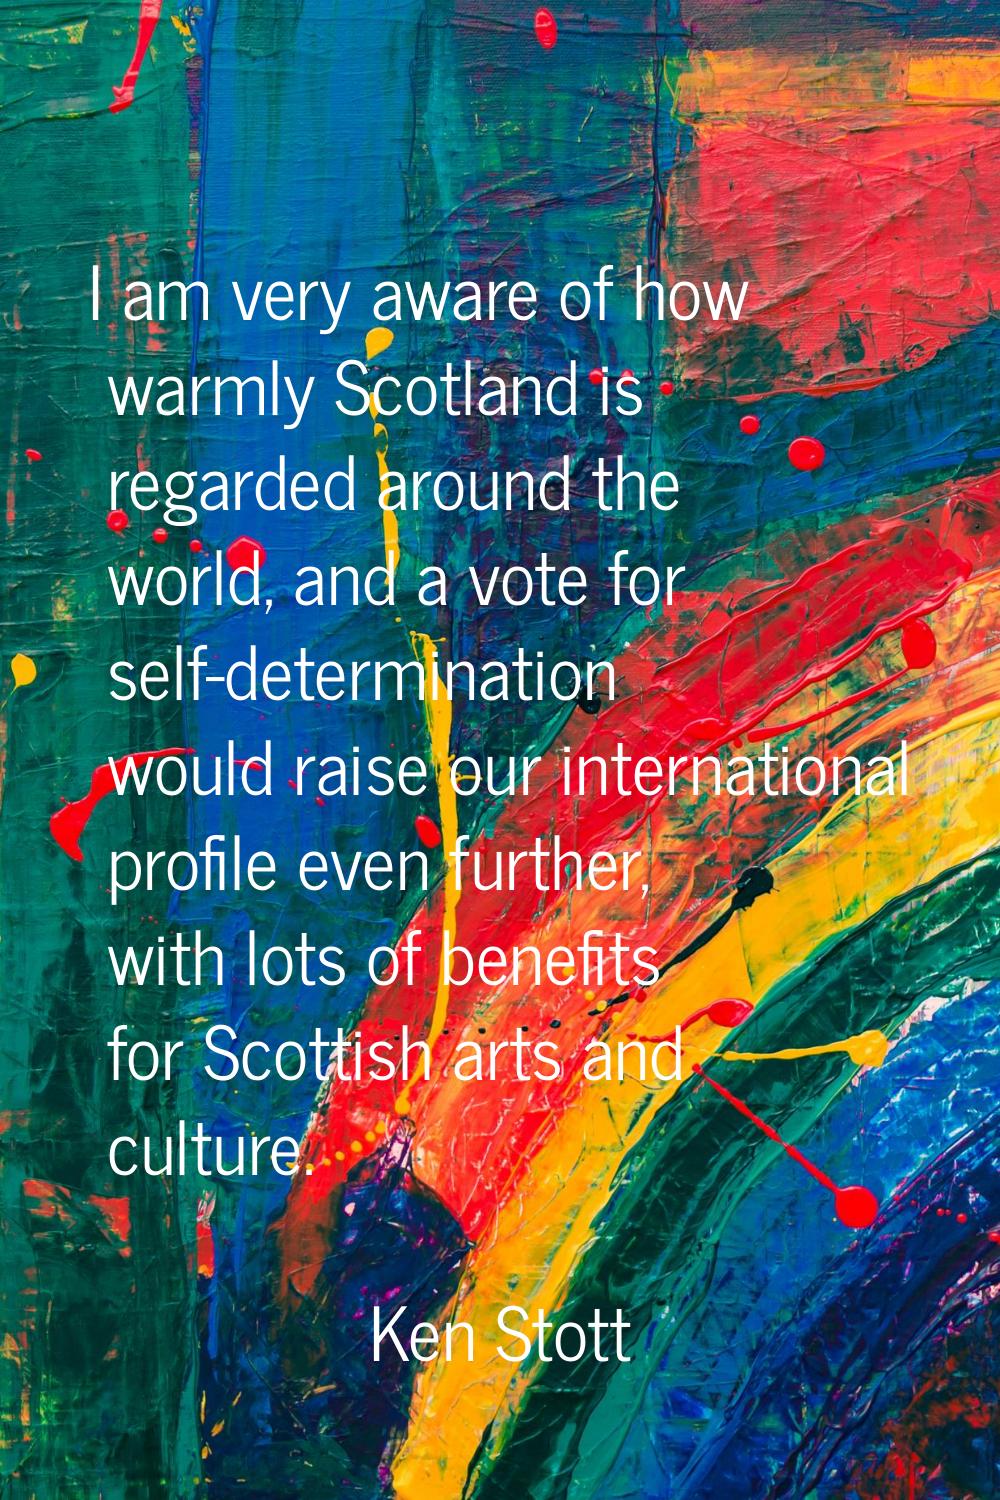 I am very aware of how warmly Scotland is regarded around the world, and a vote for self-determinat